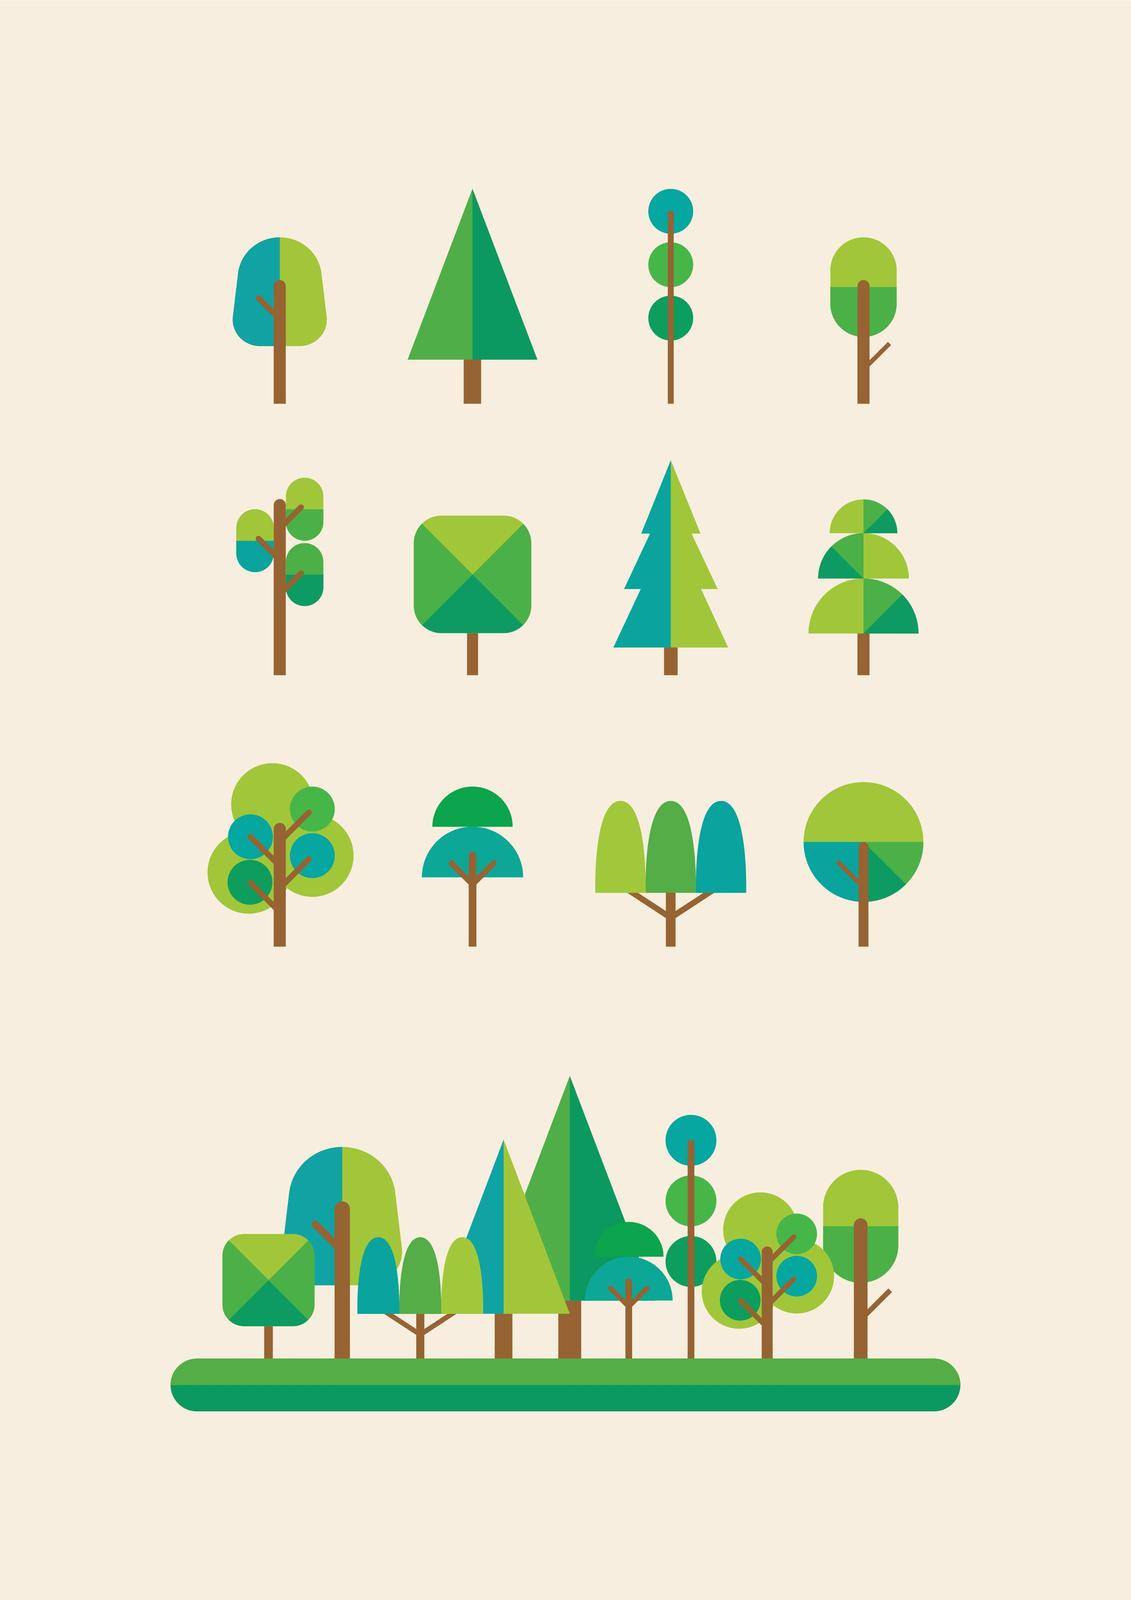 2d view of trees forest. Vector illustration